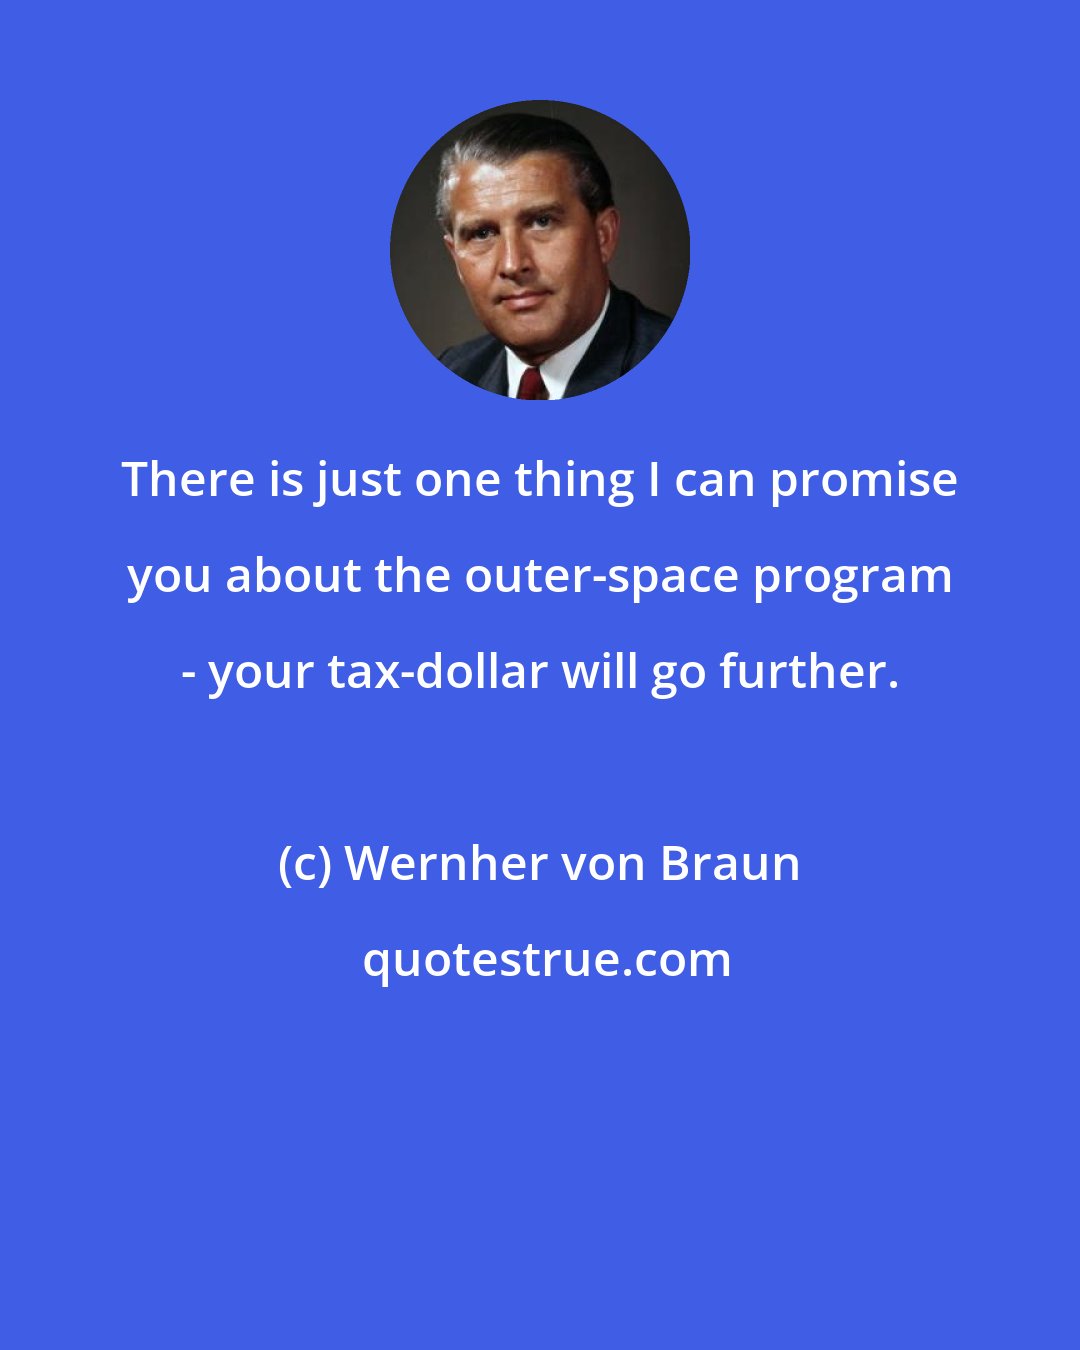 Wernher von Braun: There is just one thing I can promise you about the outer-space program - your tax-dollar will go further.